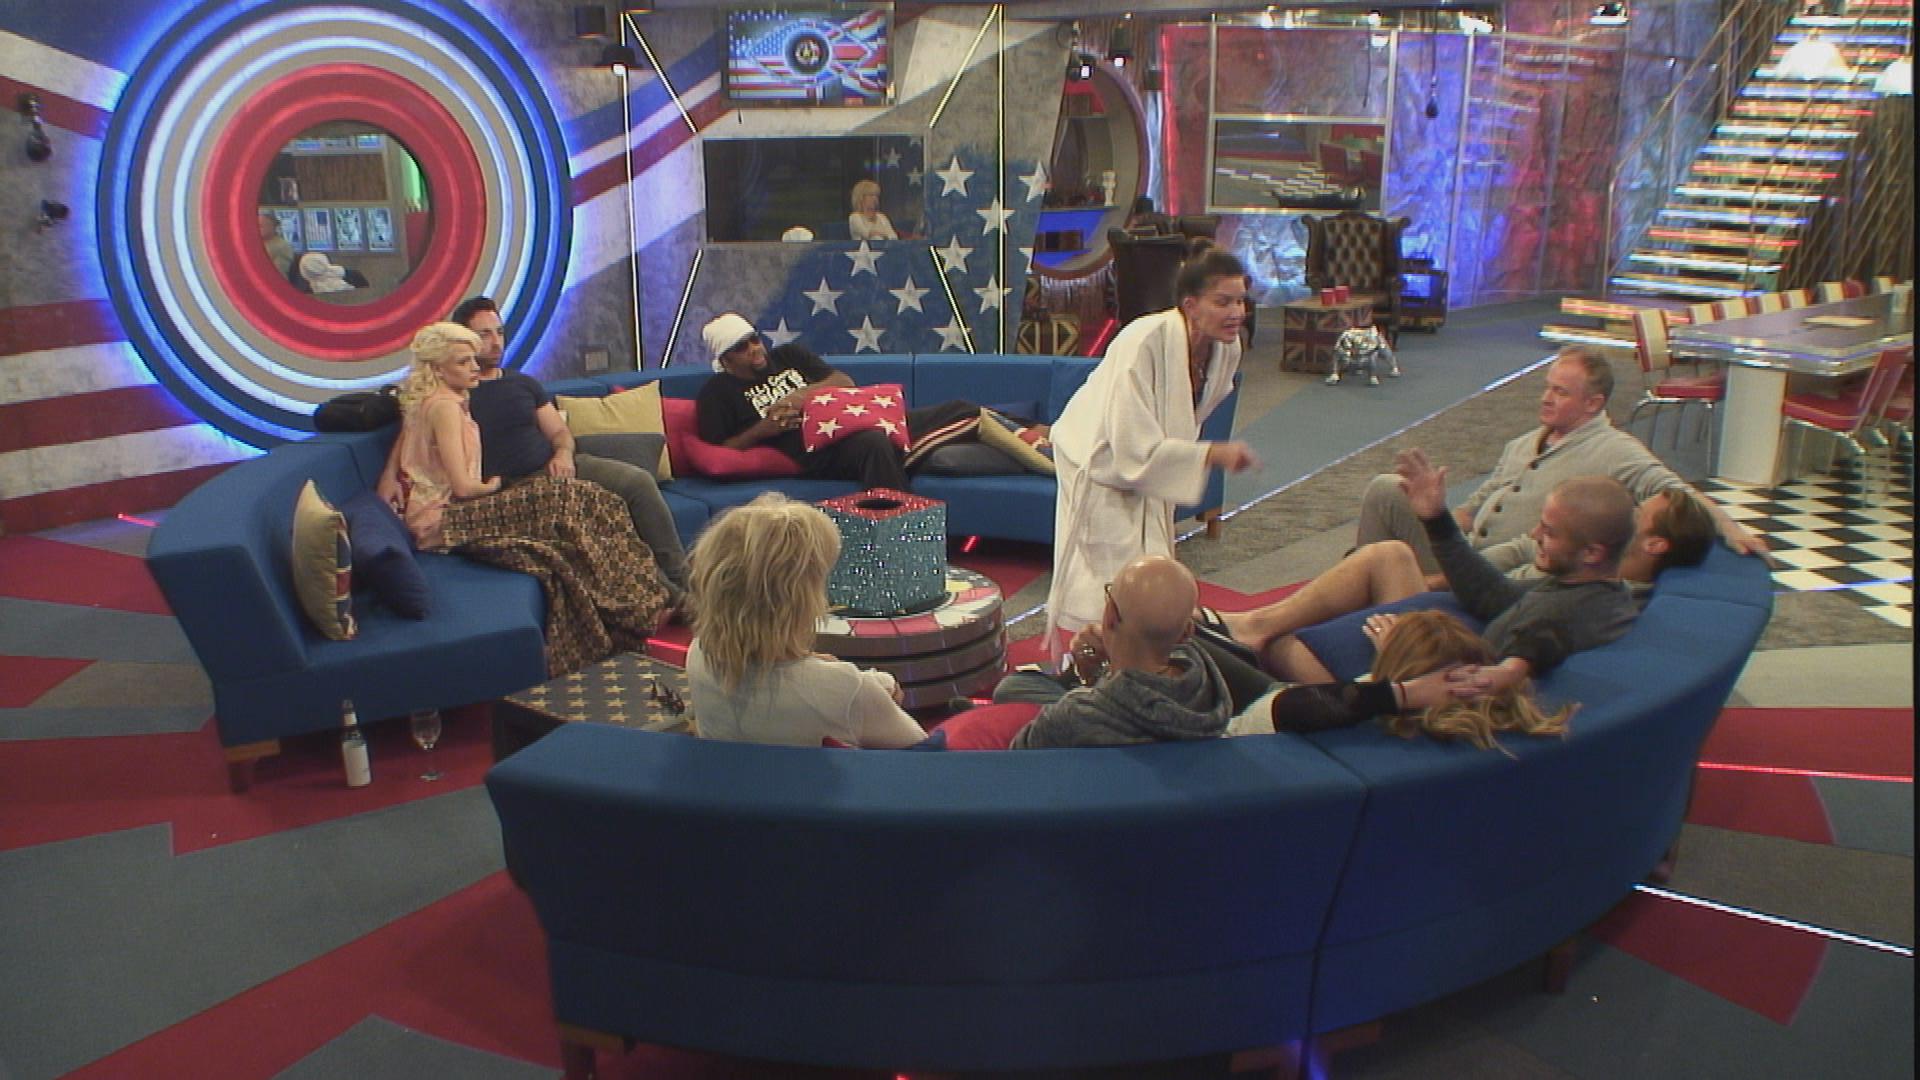 Day 18: Highlights from Day 17 in the Celebrity Big Brother House